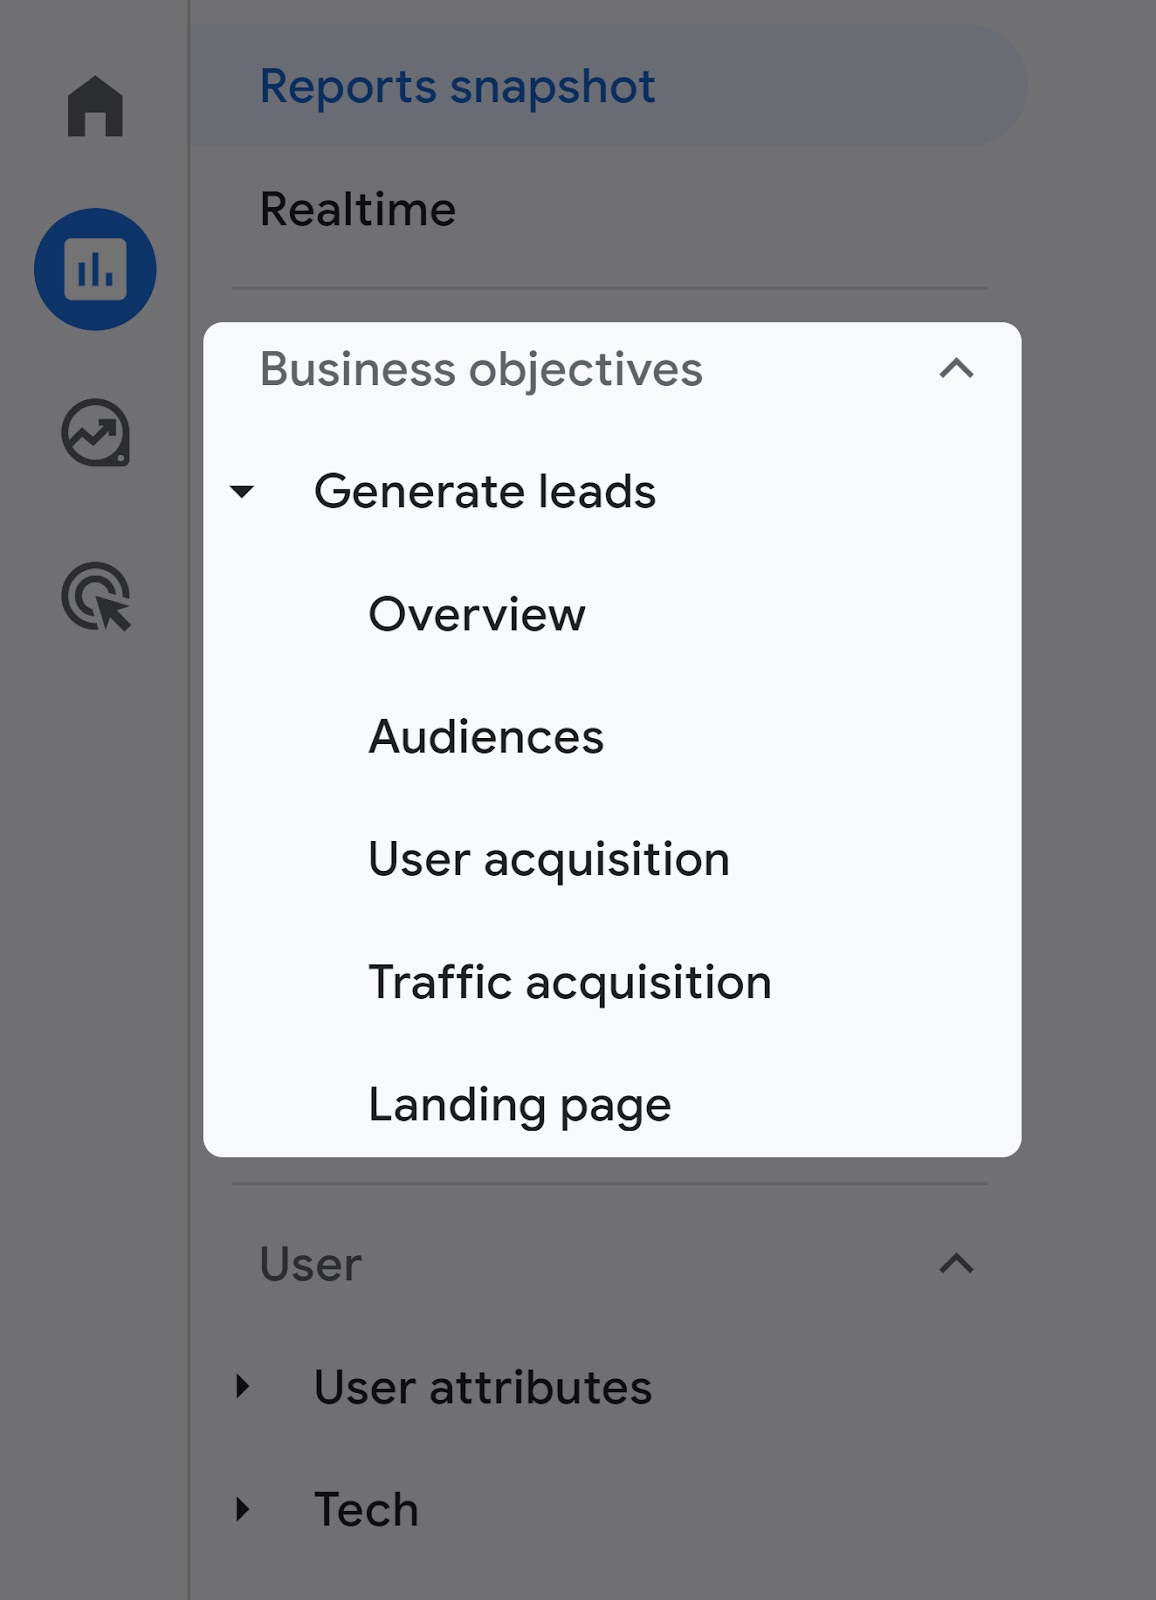 “Generate leads” postulation  connected  your dashboard